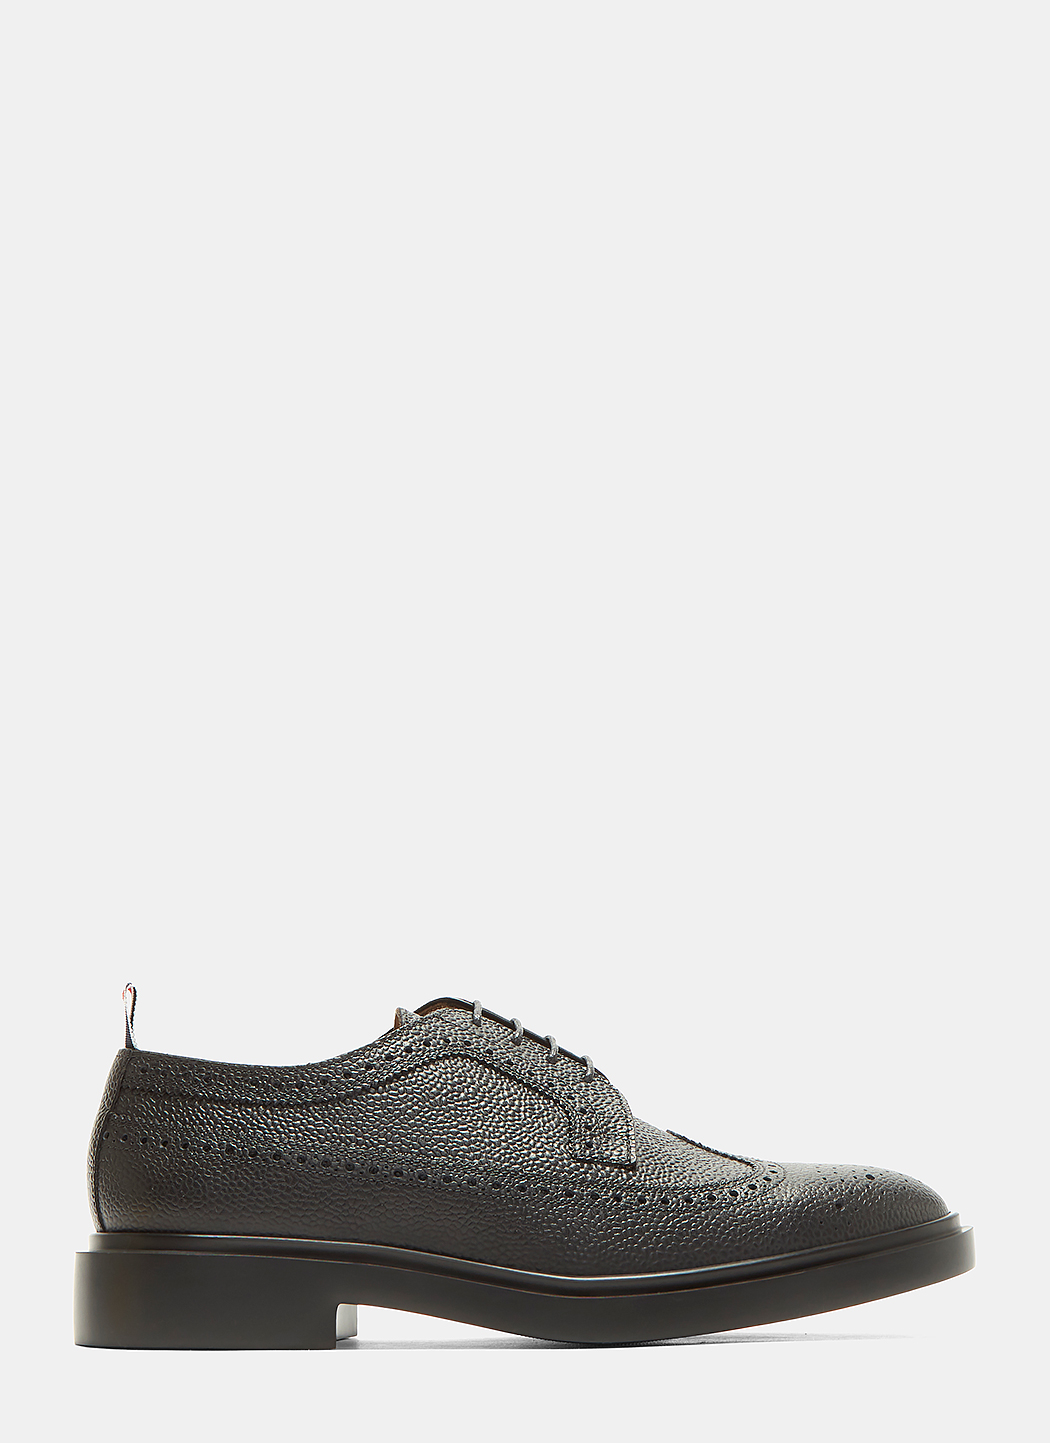 Longwing Leather Brogues